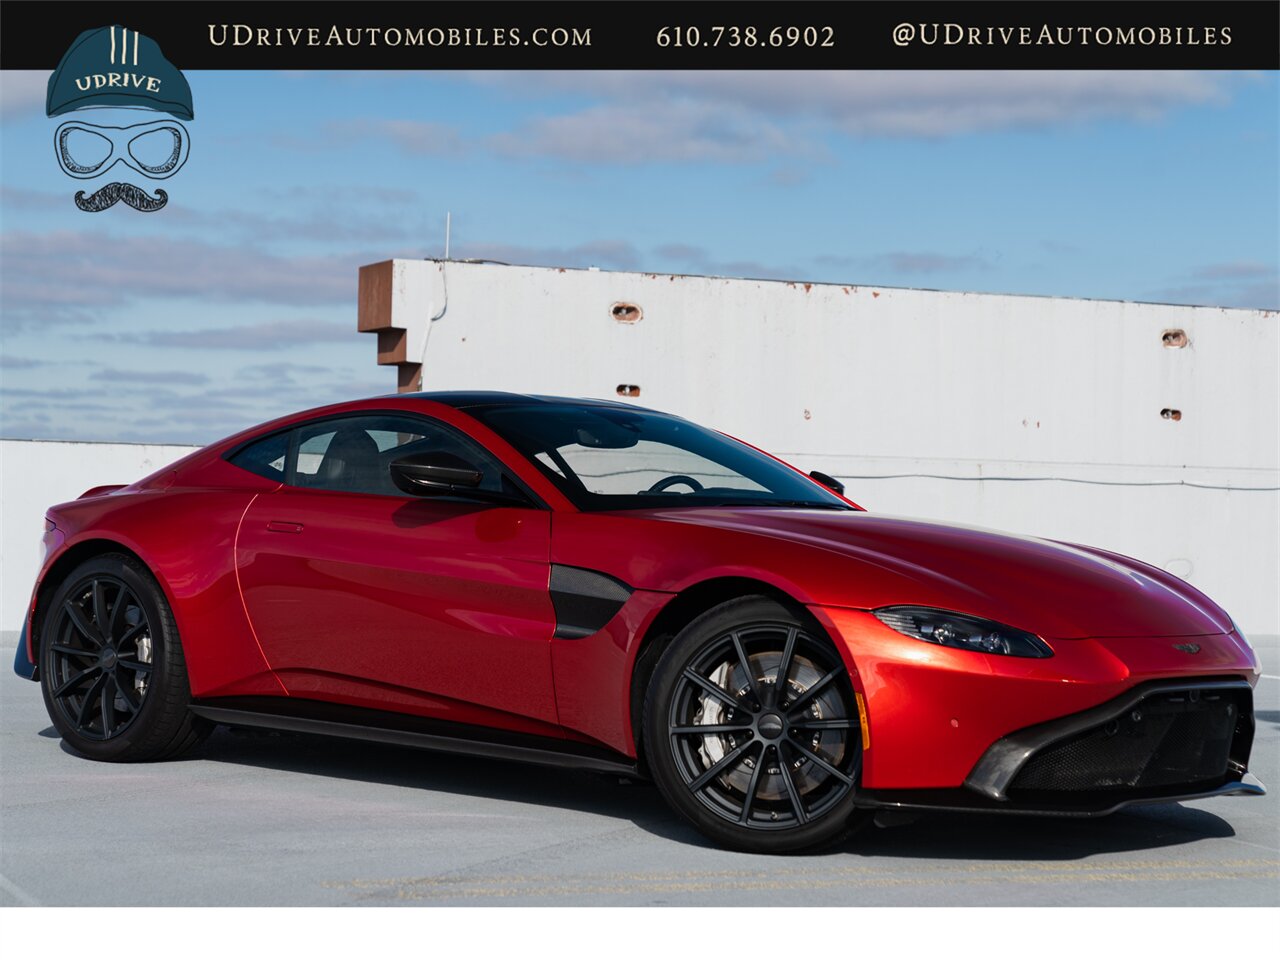 2019 Aston Martin Vantage  Incredibly Spec Rare Q Exclusive Fiamma Red $222k MSRP 1 of a Kind CPO - Photo 3 - West Chester, PA 19382